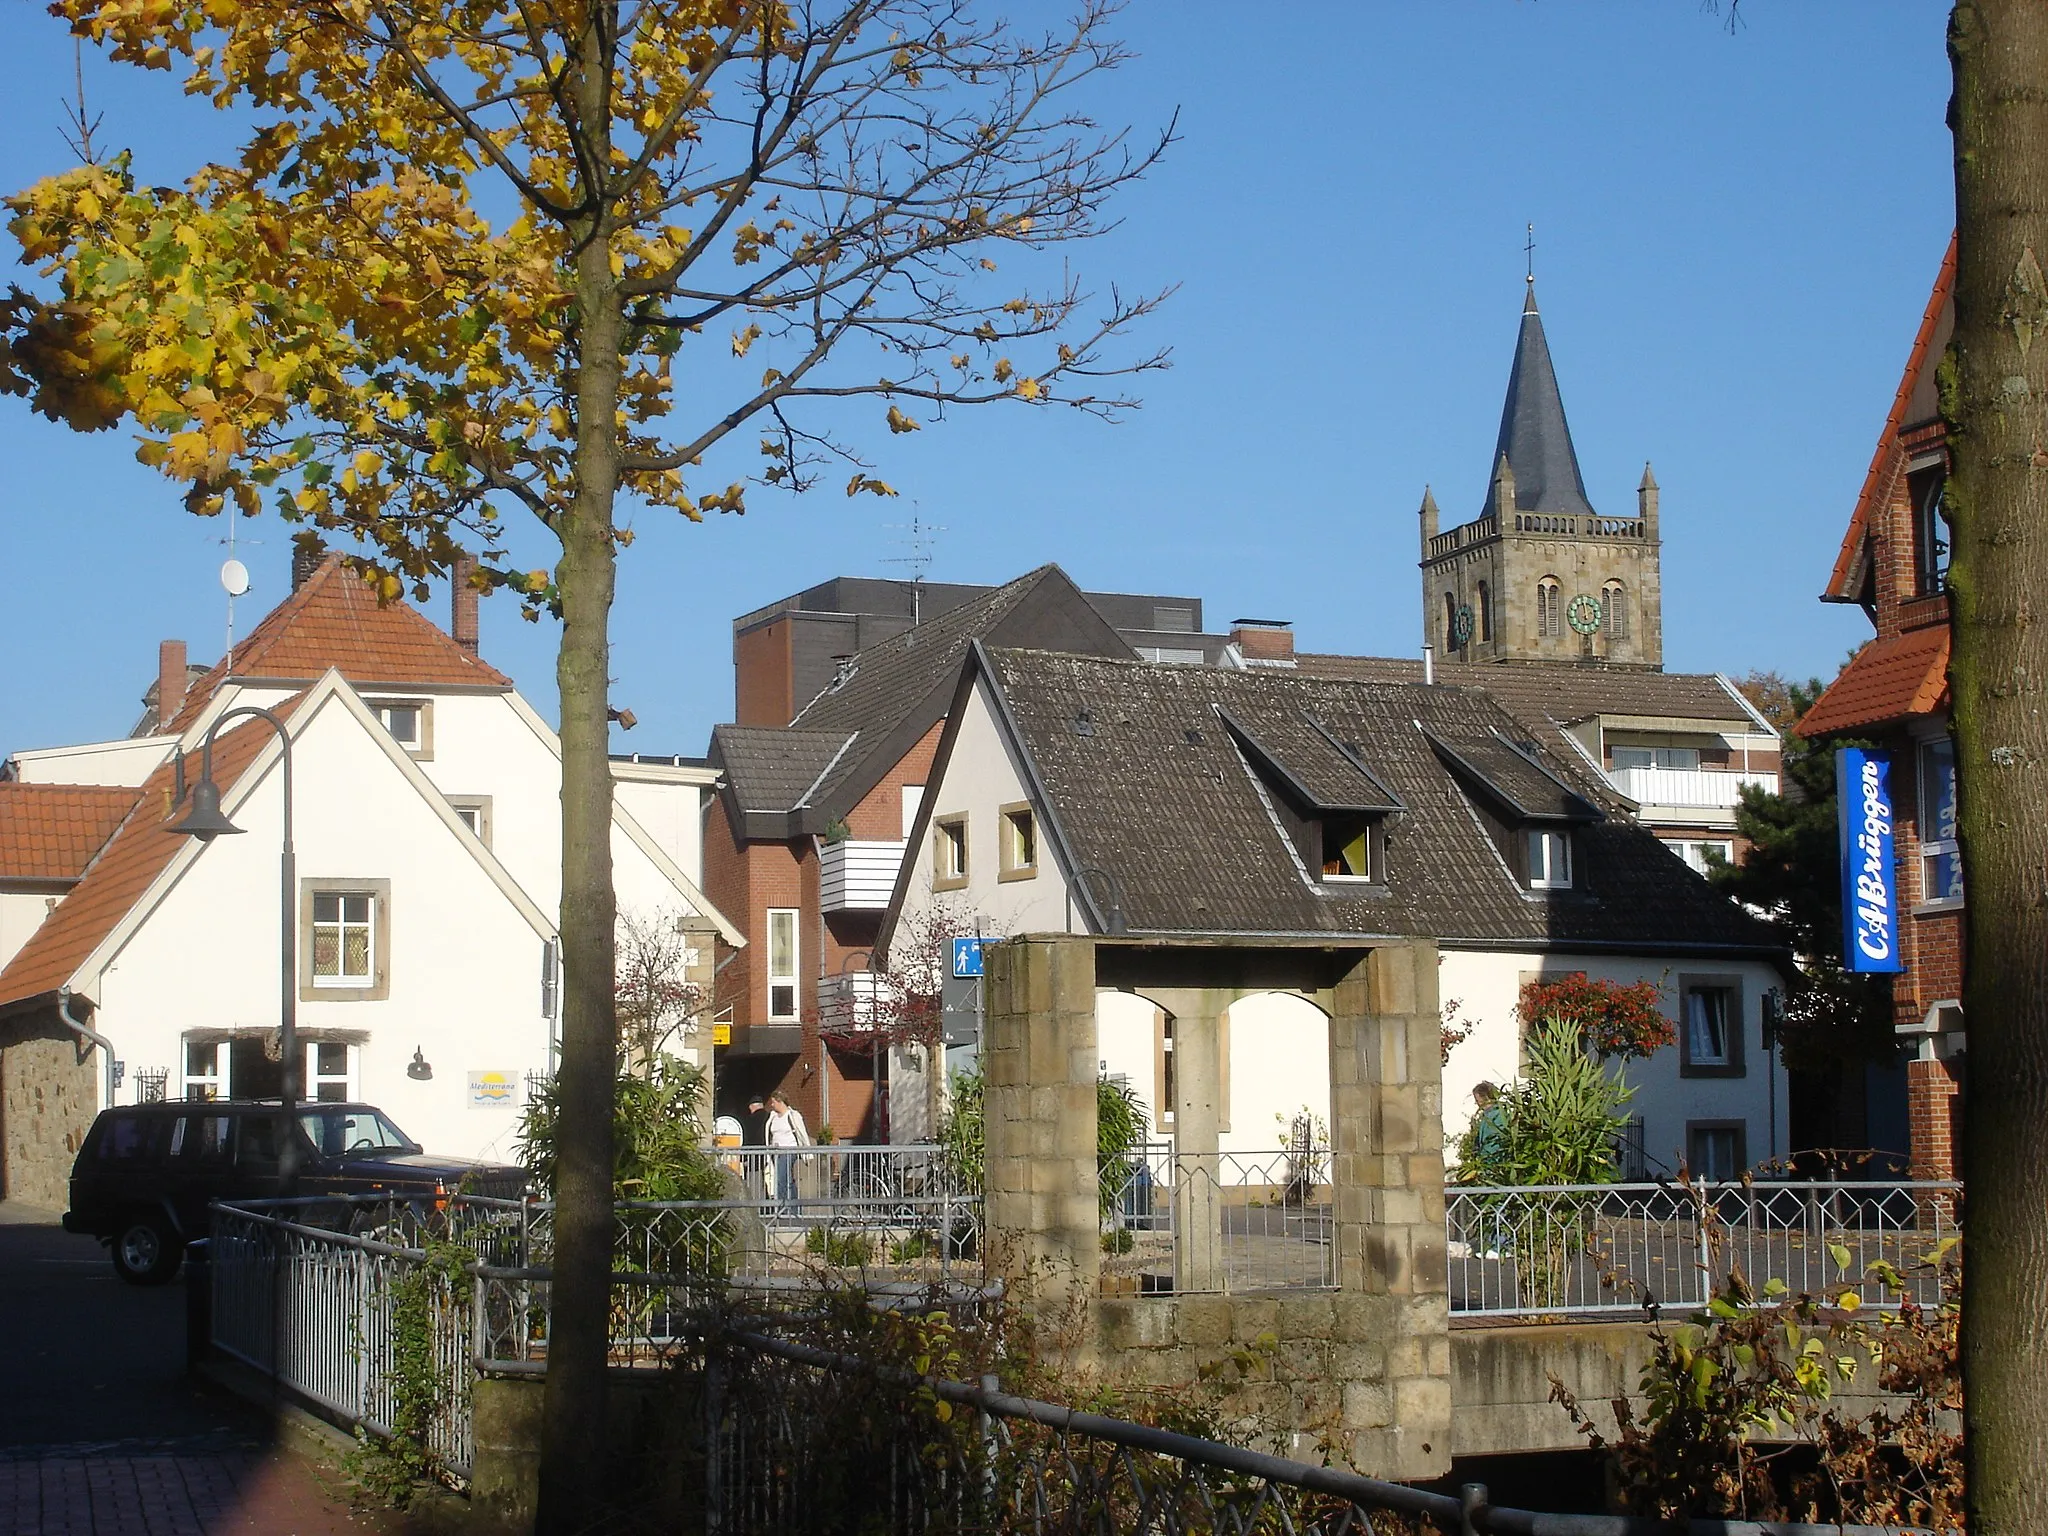 Photo showing: Panoramashot of the city center of Ibbenbüren: "Alter Posthof" with protestantic church "Christuskirche" in the back

This  image shows a heritage building in Germany, located in the North Rhine-Westphalian city Ibbenbüren (no. A 009).

This  image shows a heritage building in Germany, located in the North Rhine-Westphalian city Ibbenbüren (no. A 036).